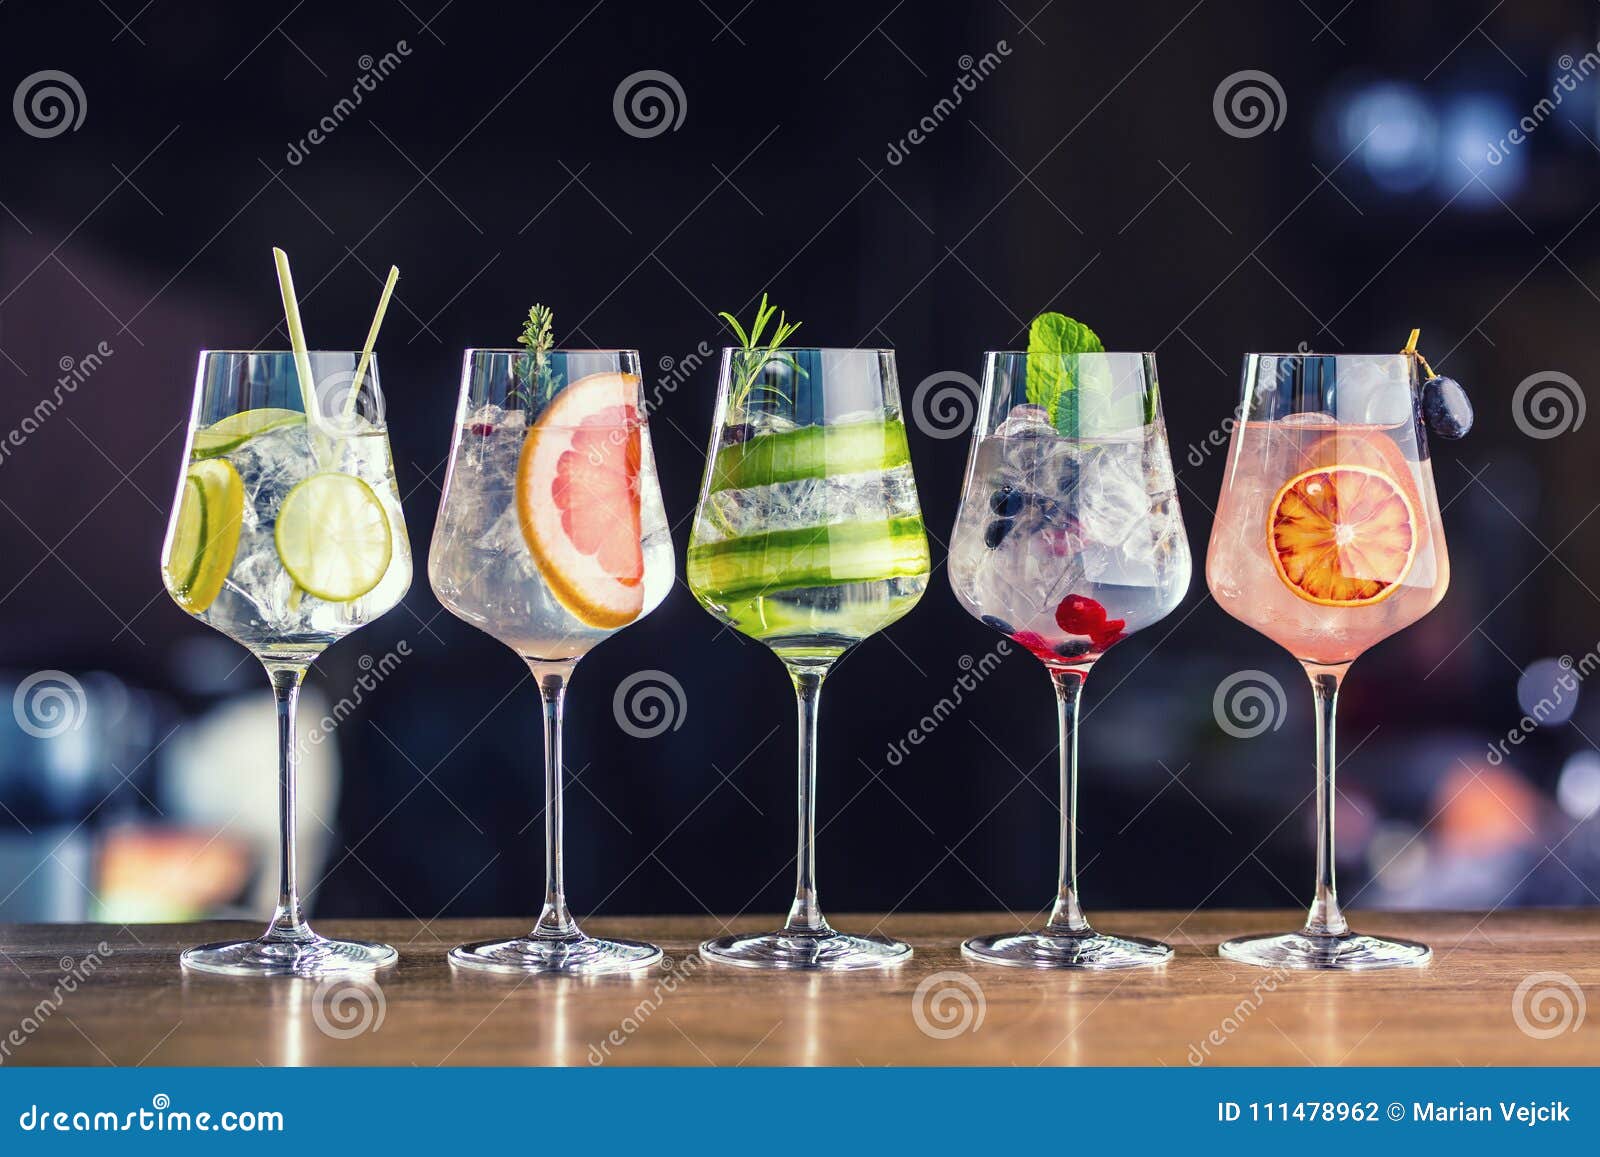 Five Colorful Gin Tonic Cocktails In Wine Glasses On Bar ...